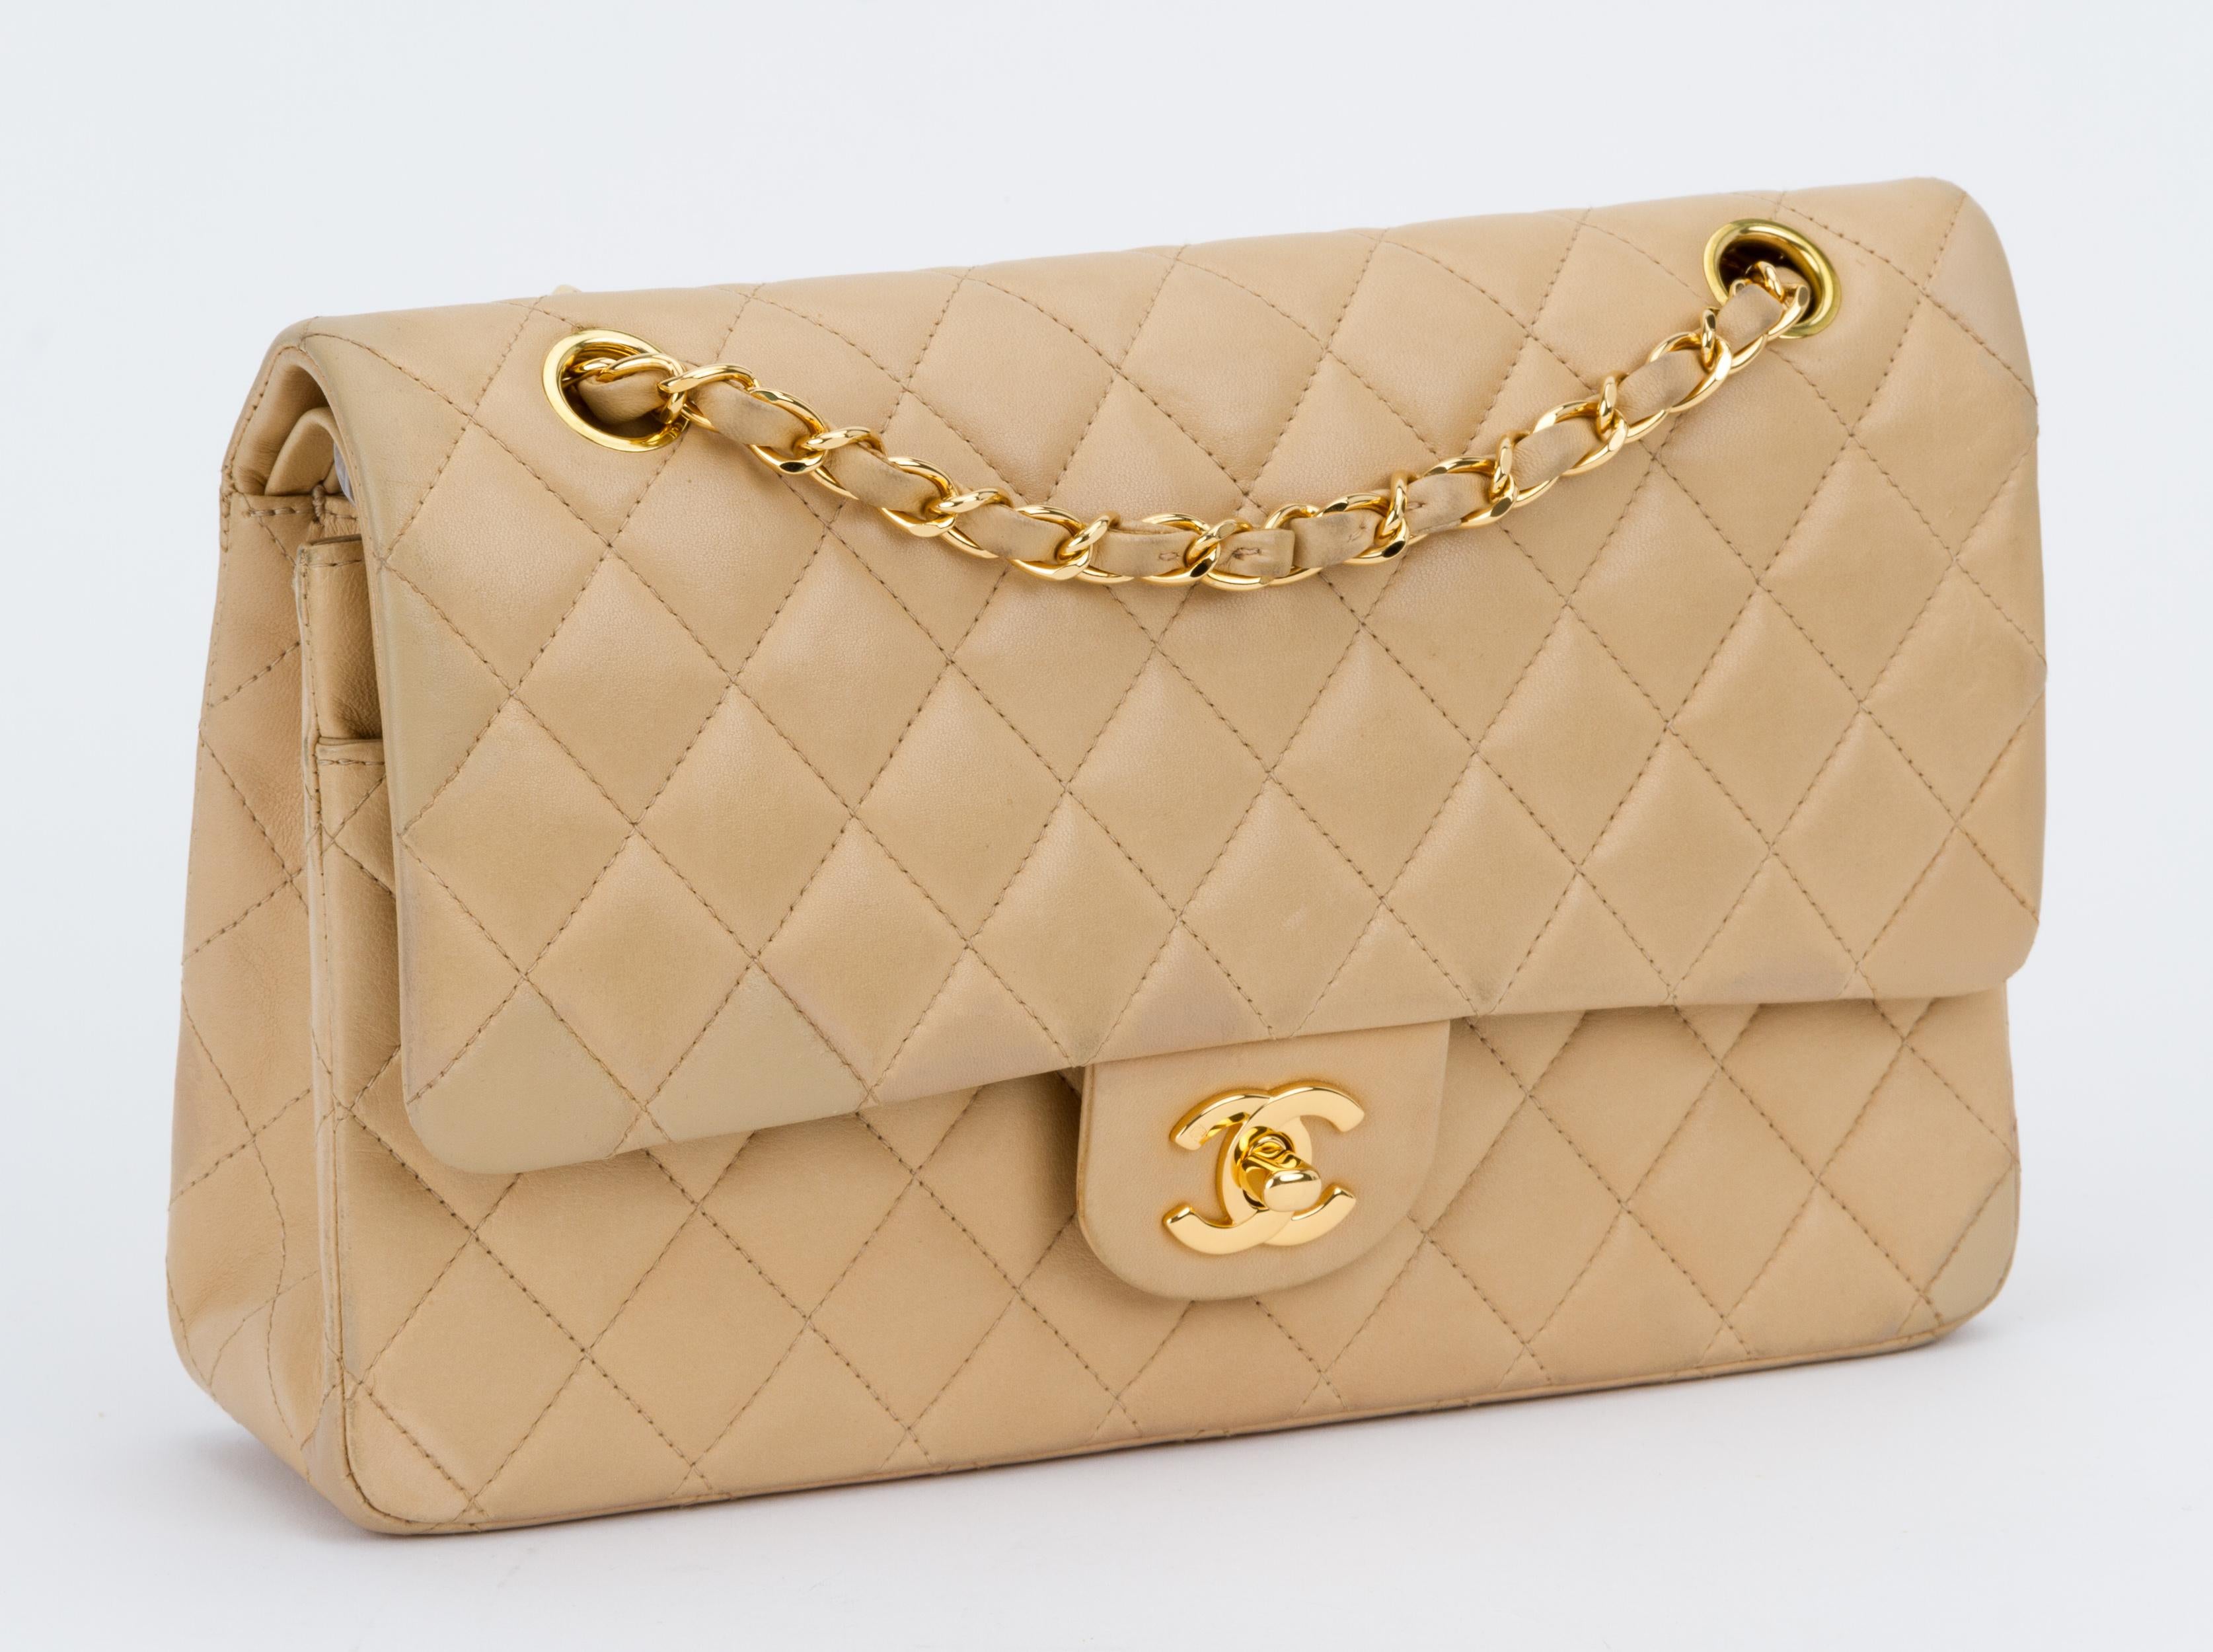 Chanel quilted double flap classic medium bag in beige leather and gold tone hardware. Shoulder drop, 9